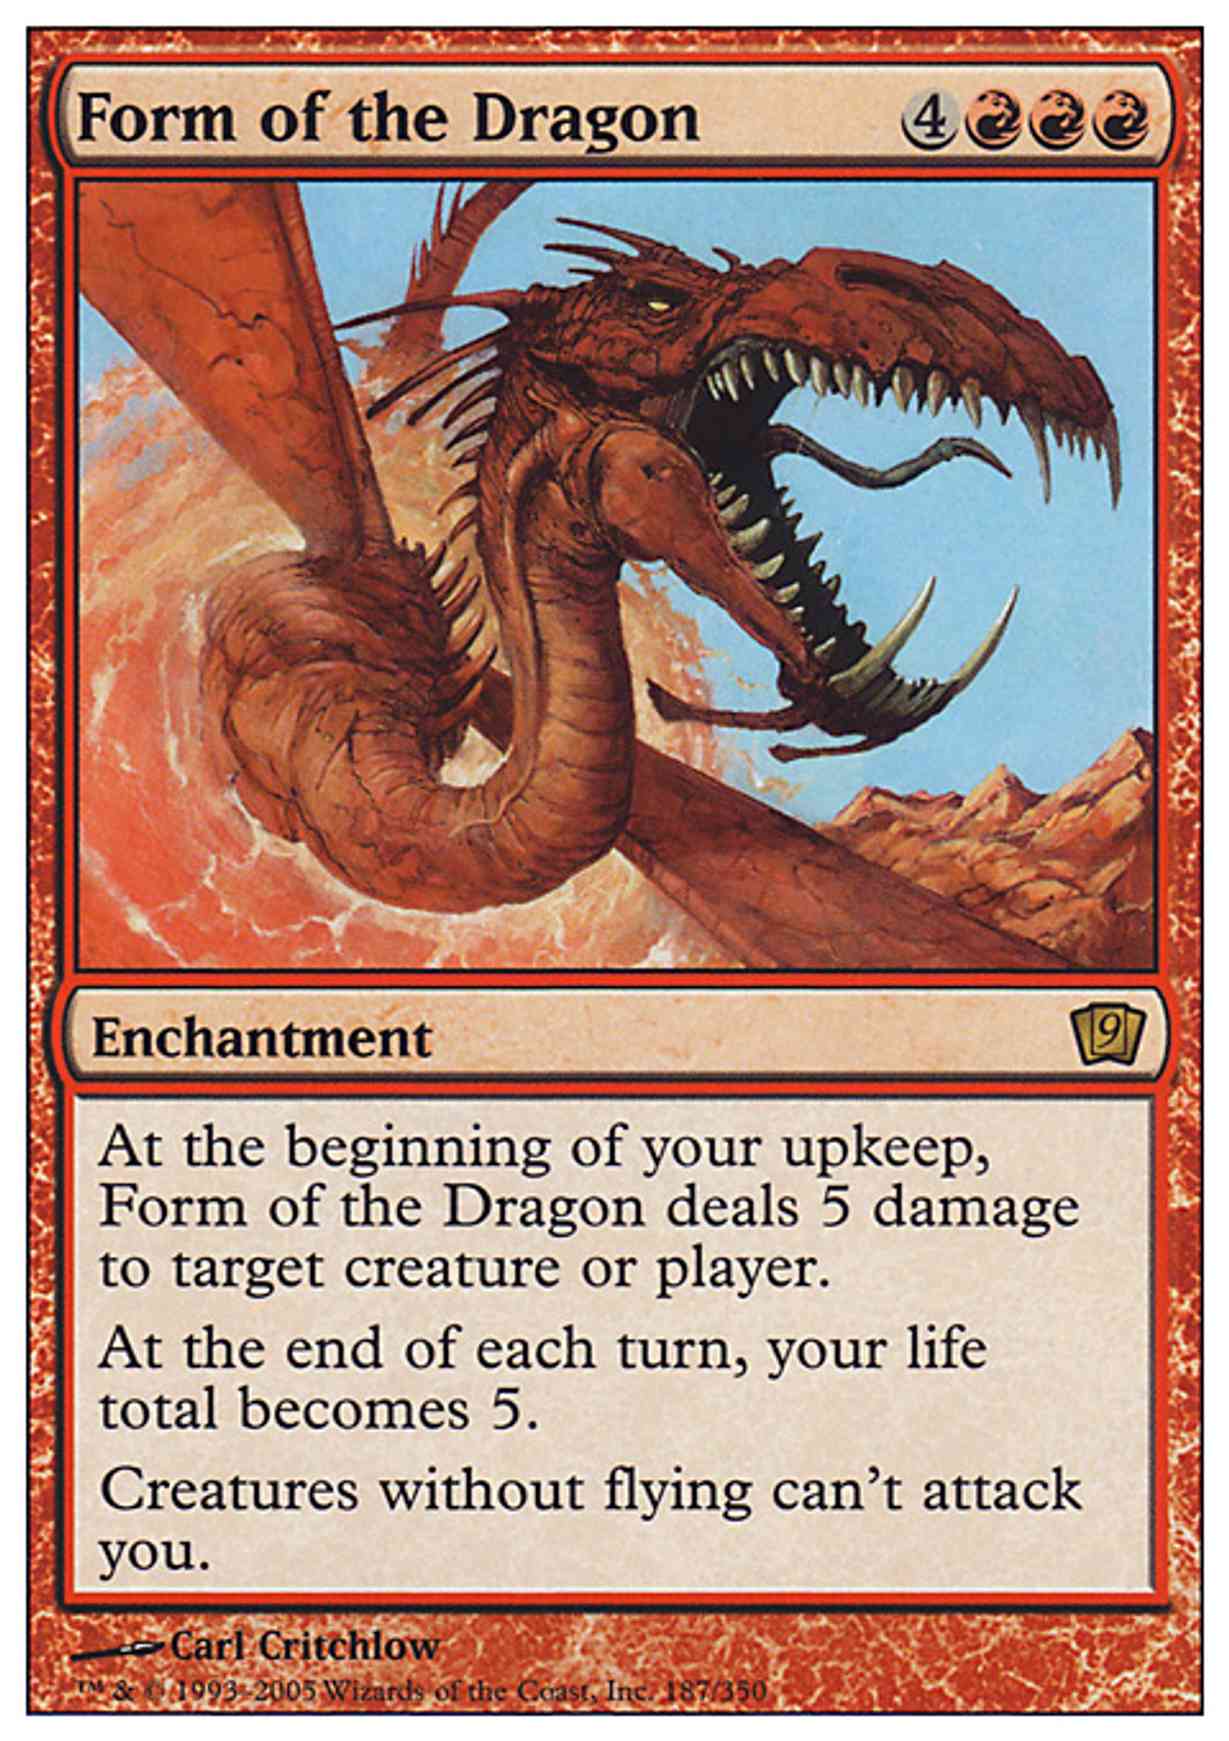 Form of the Dragon magic card front